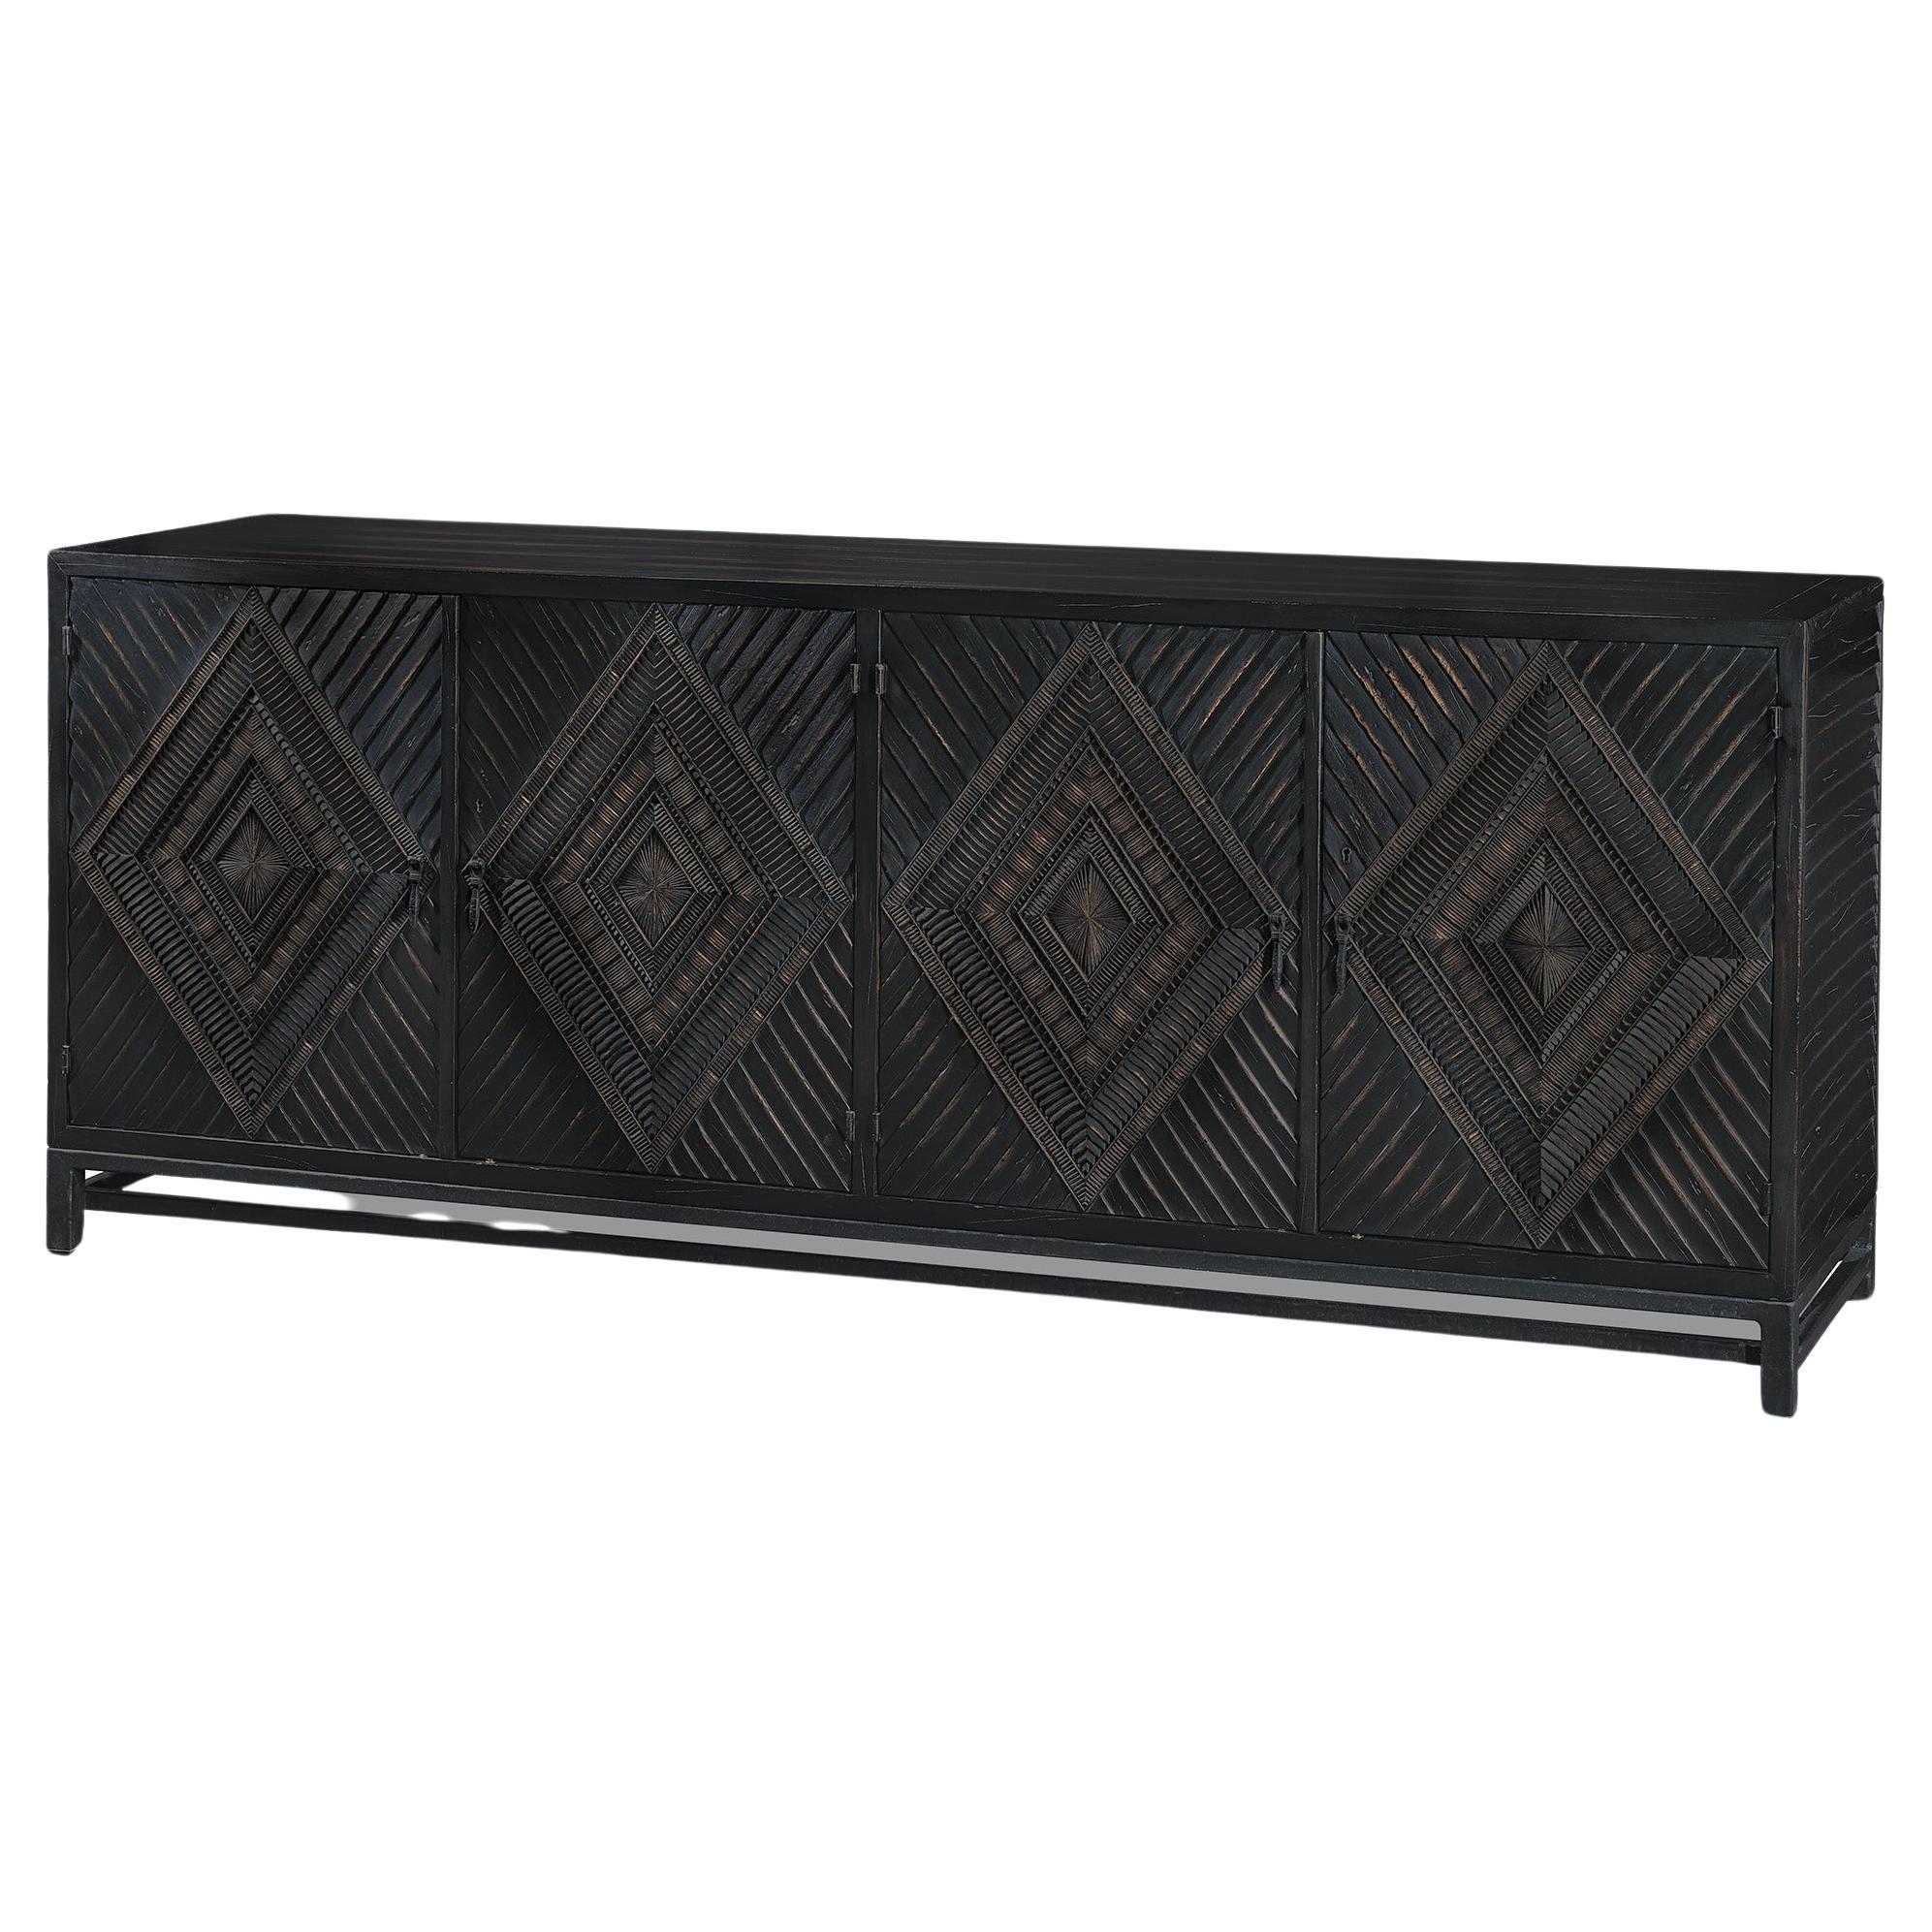 Wood Villiers Buffet with 4 texturized doors by hundreds of hand applied pieces.